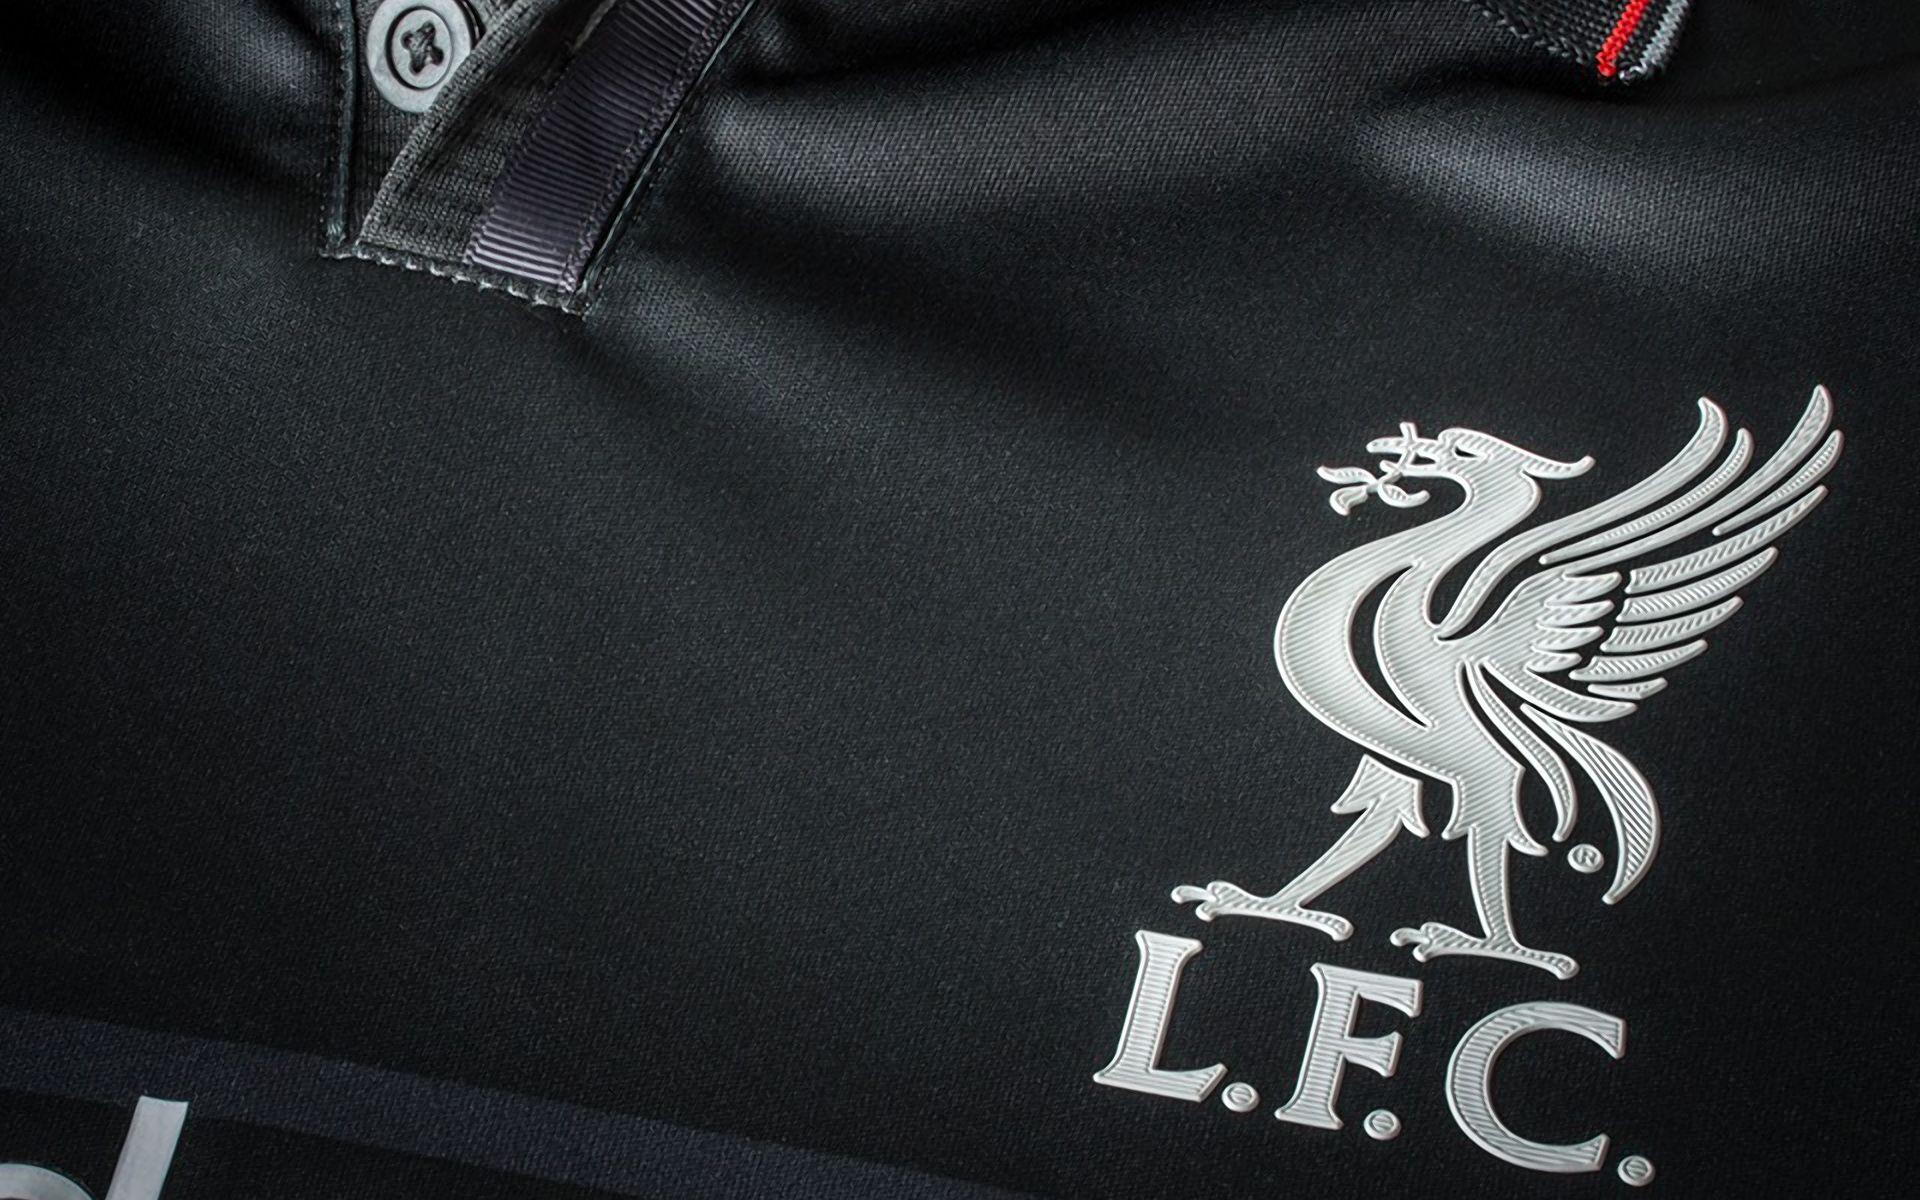 Free Liverpool FC Keep Calm and Walk On iPhoneAndroid Wallpaper. HD